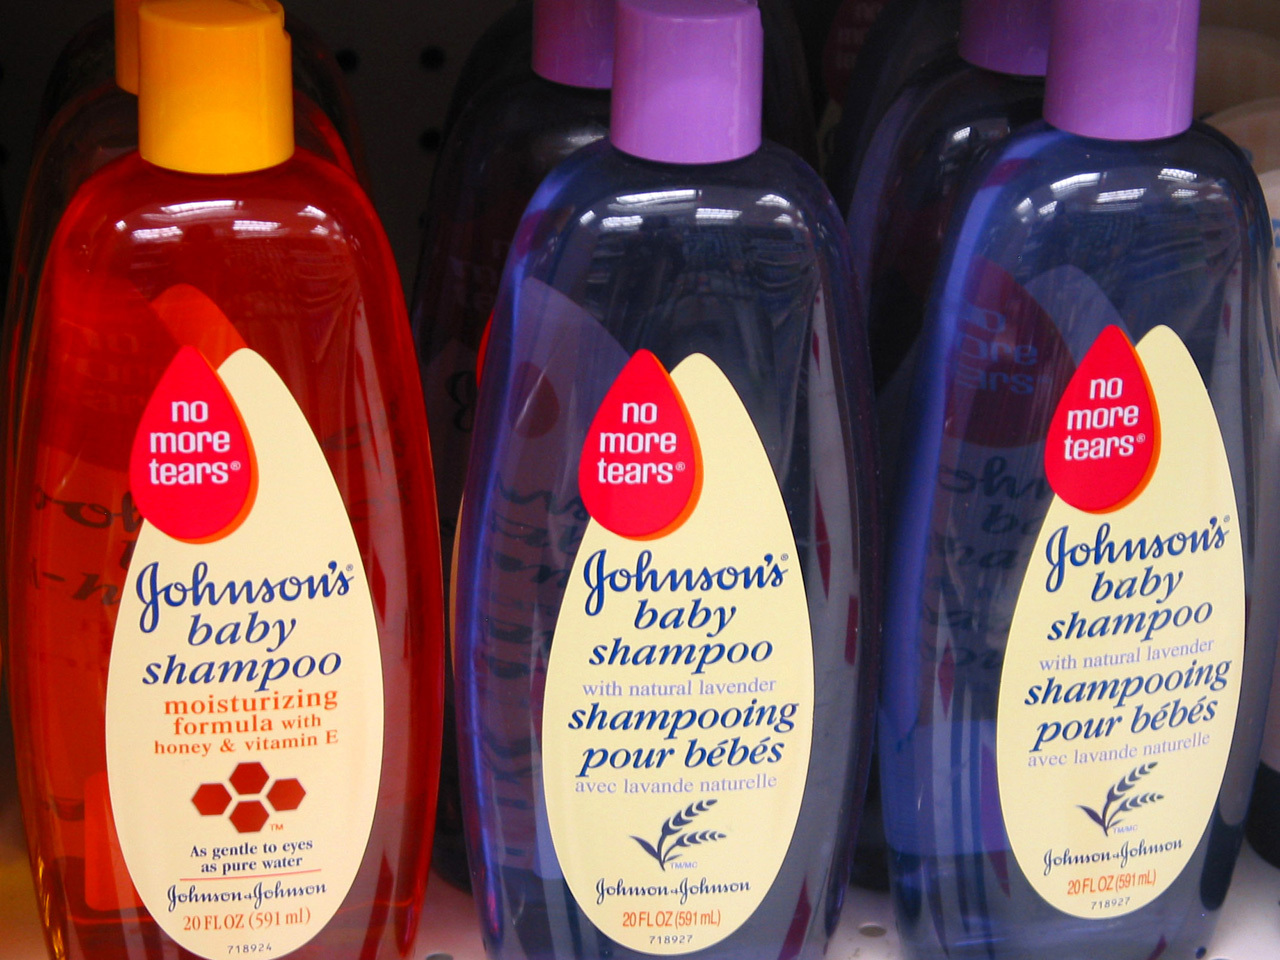 baby shampoo good for adults